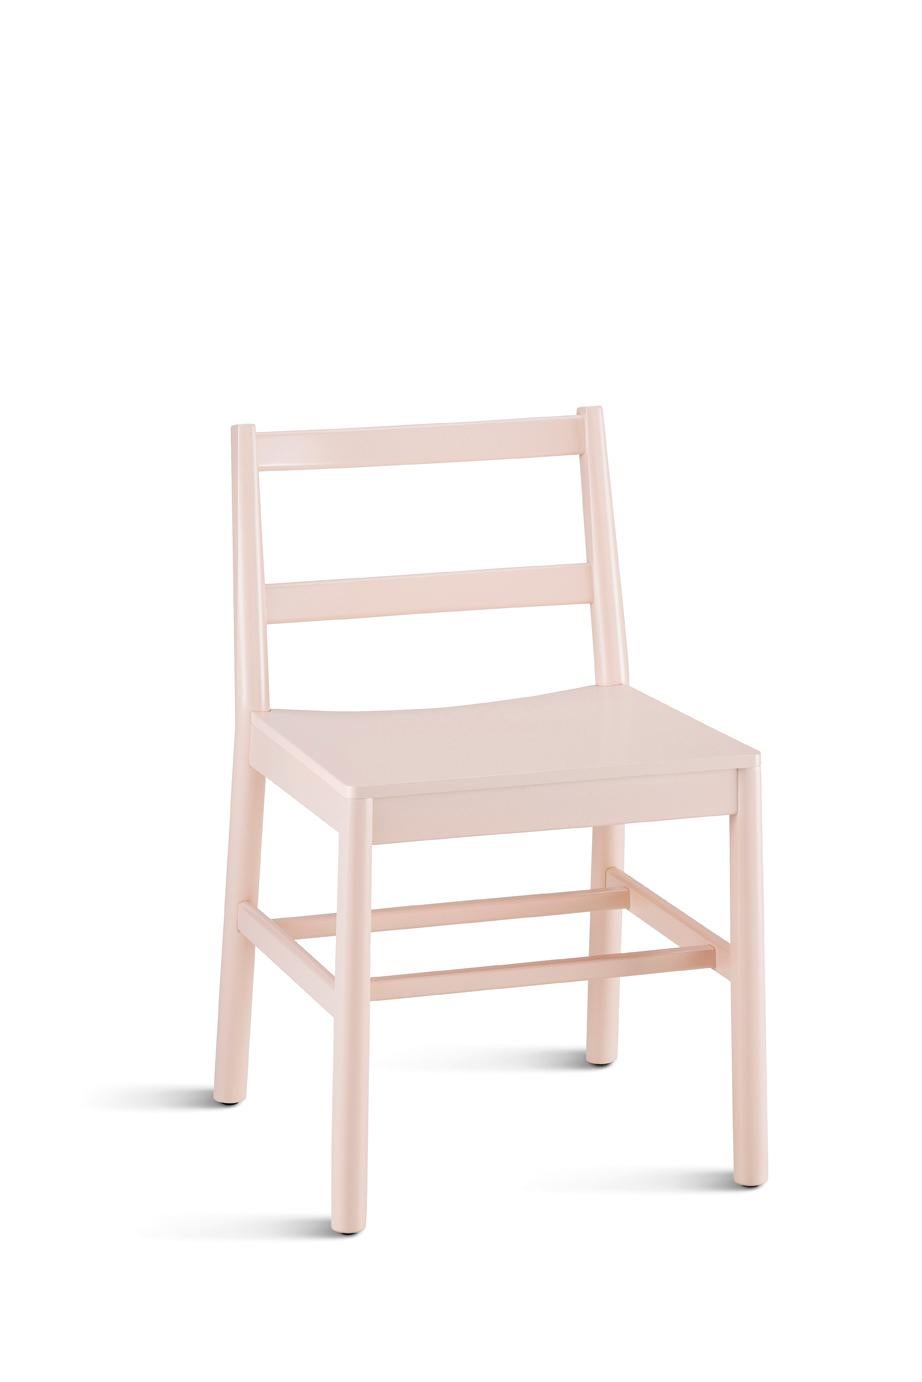 Chair Art, 0020-LE in Beechwood Painted and Wood Seat by Emilio Nanni For Sale 10